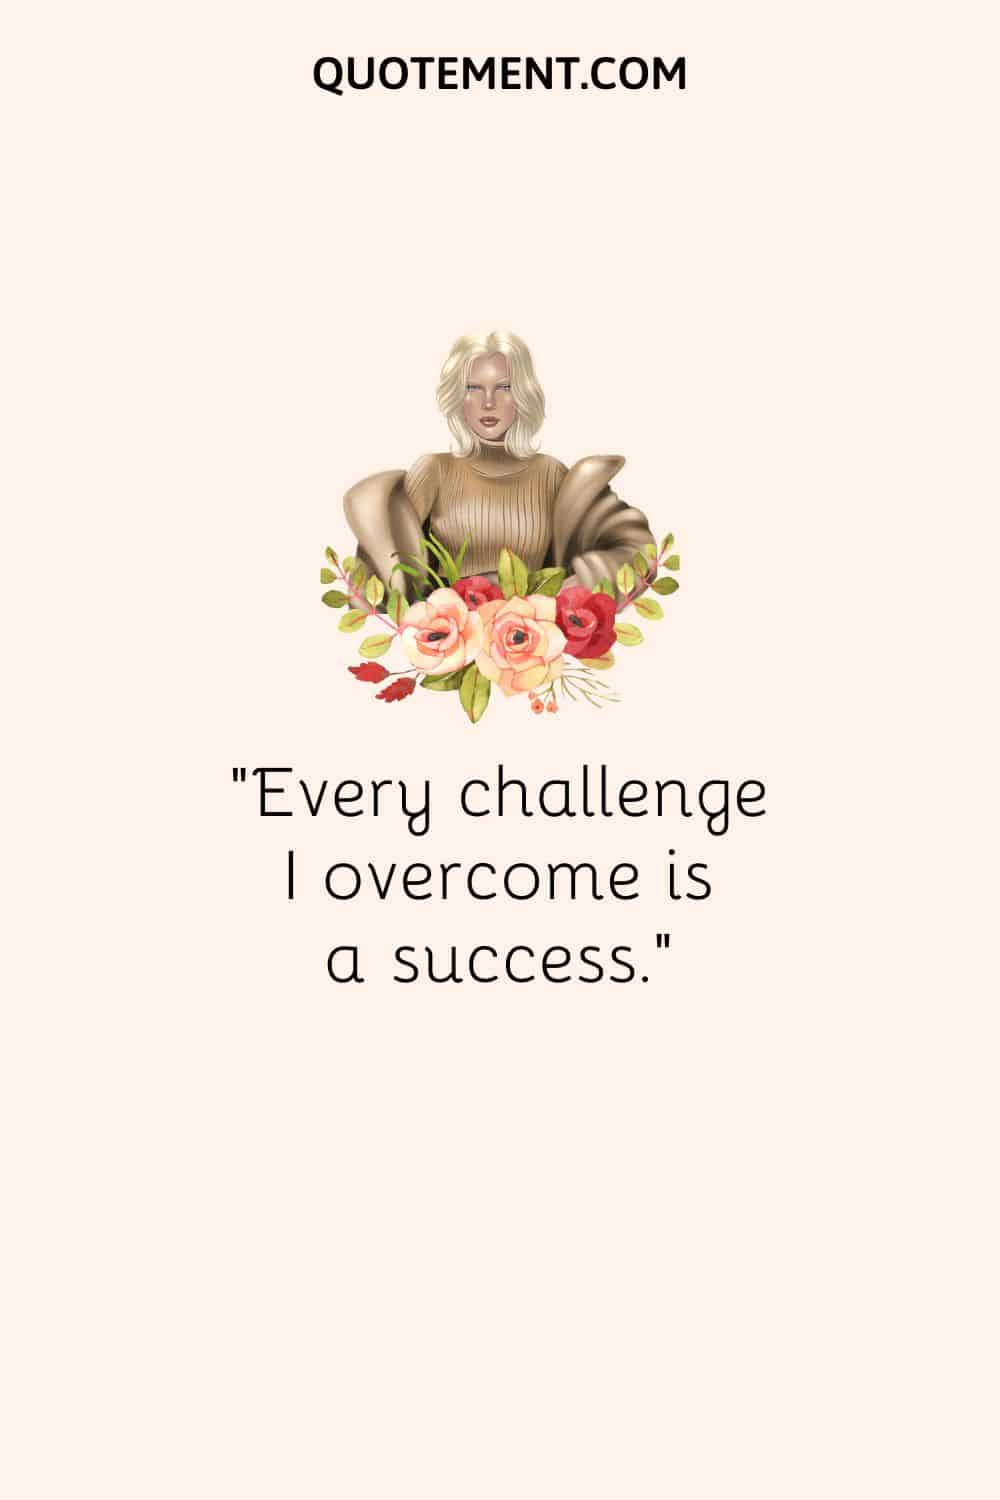 “Every challenge I overcome is a success.“